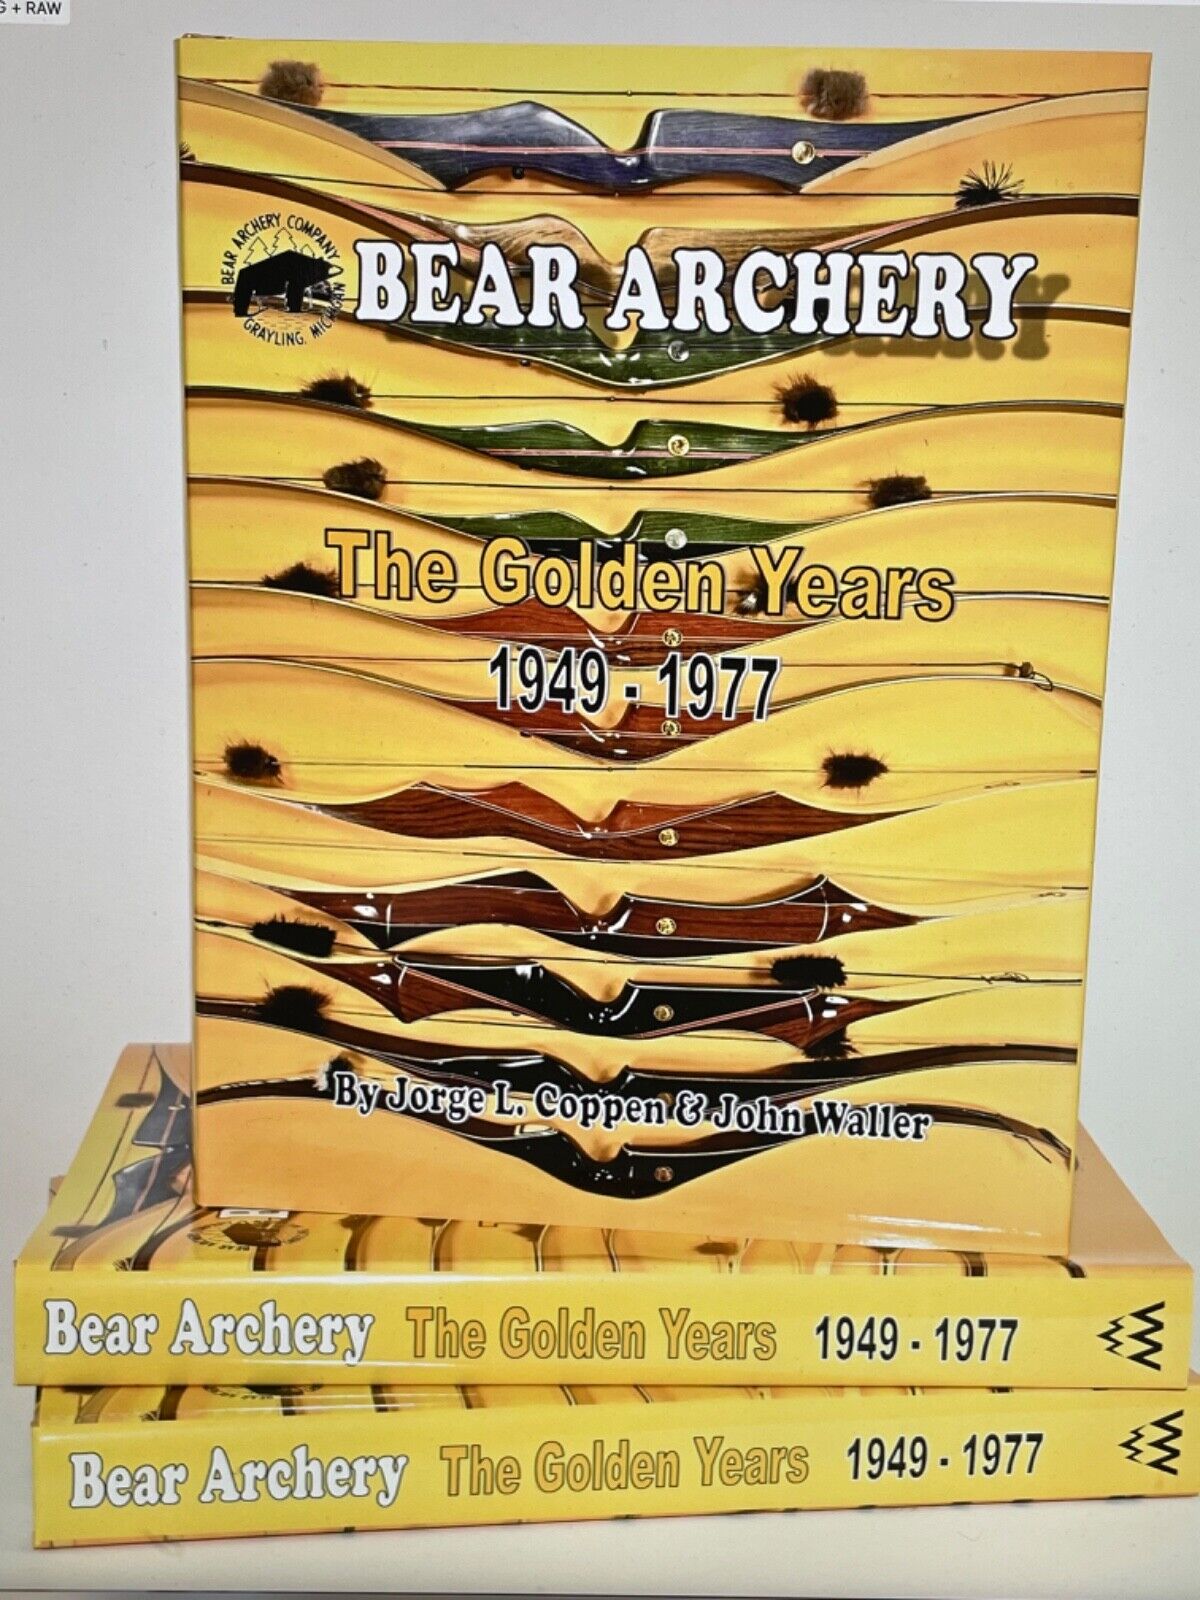 BEAR ARCHERY THE GOLDEN YEARS 1949-1977   Brand New  444 Page Hardcover